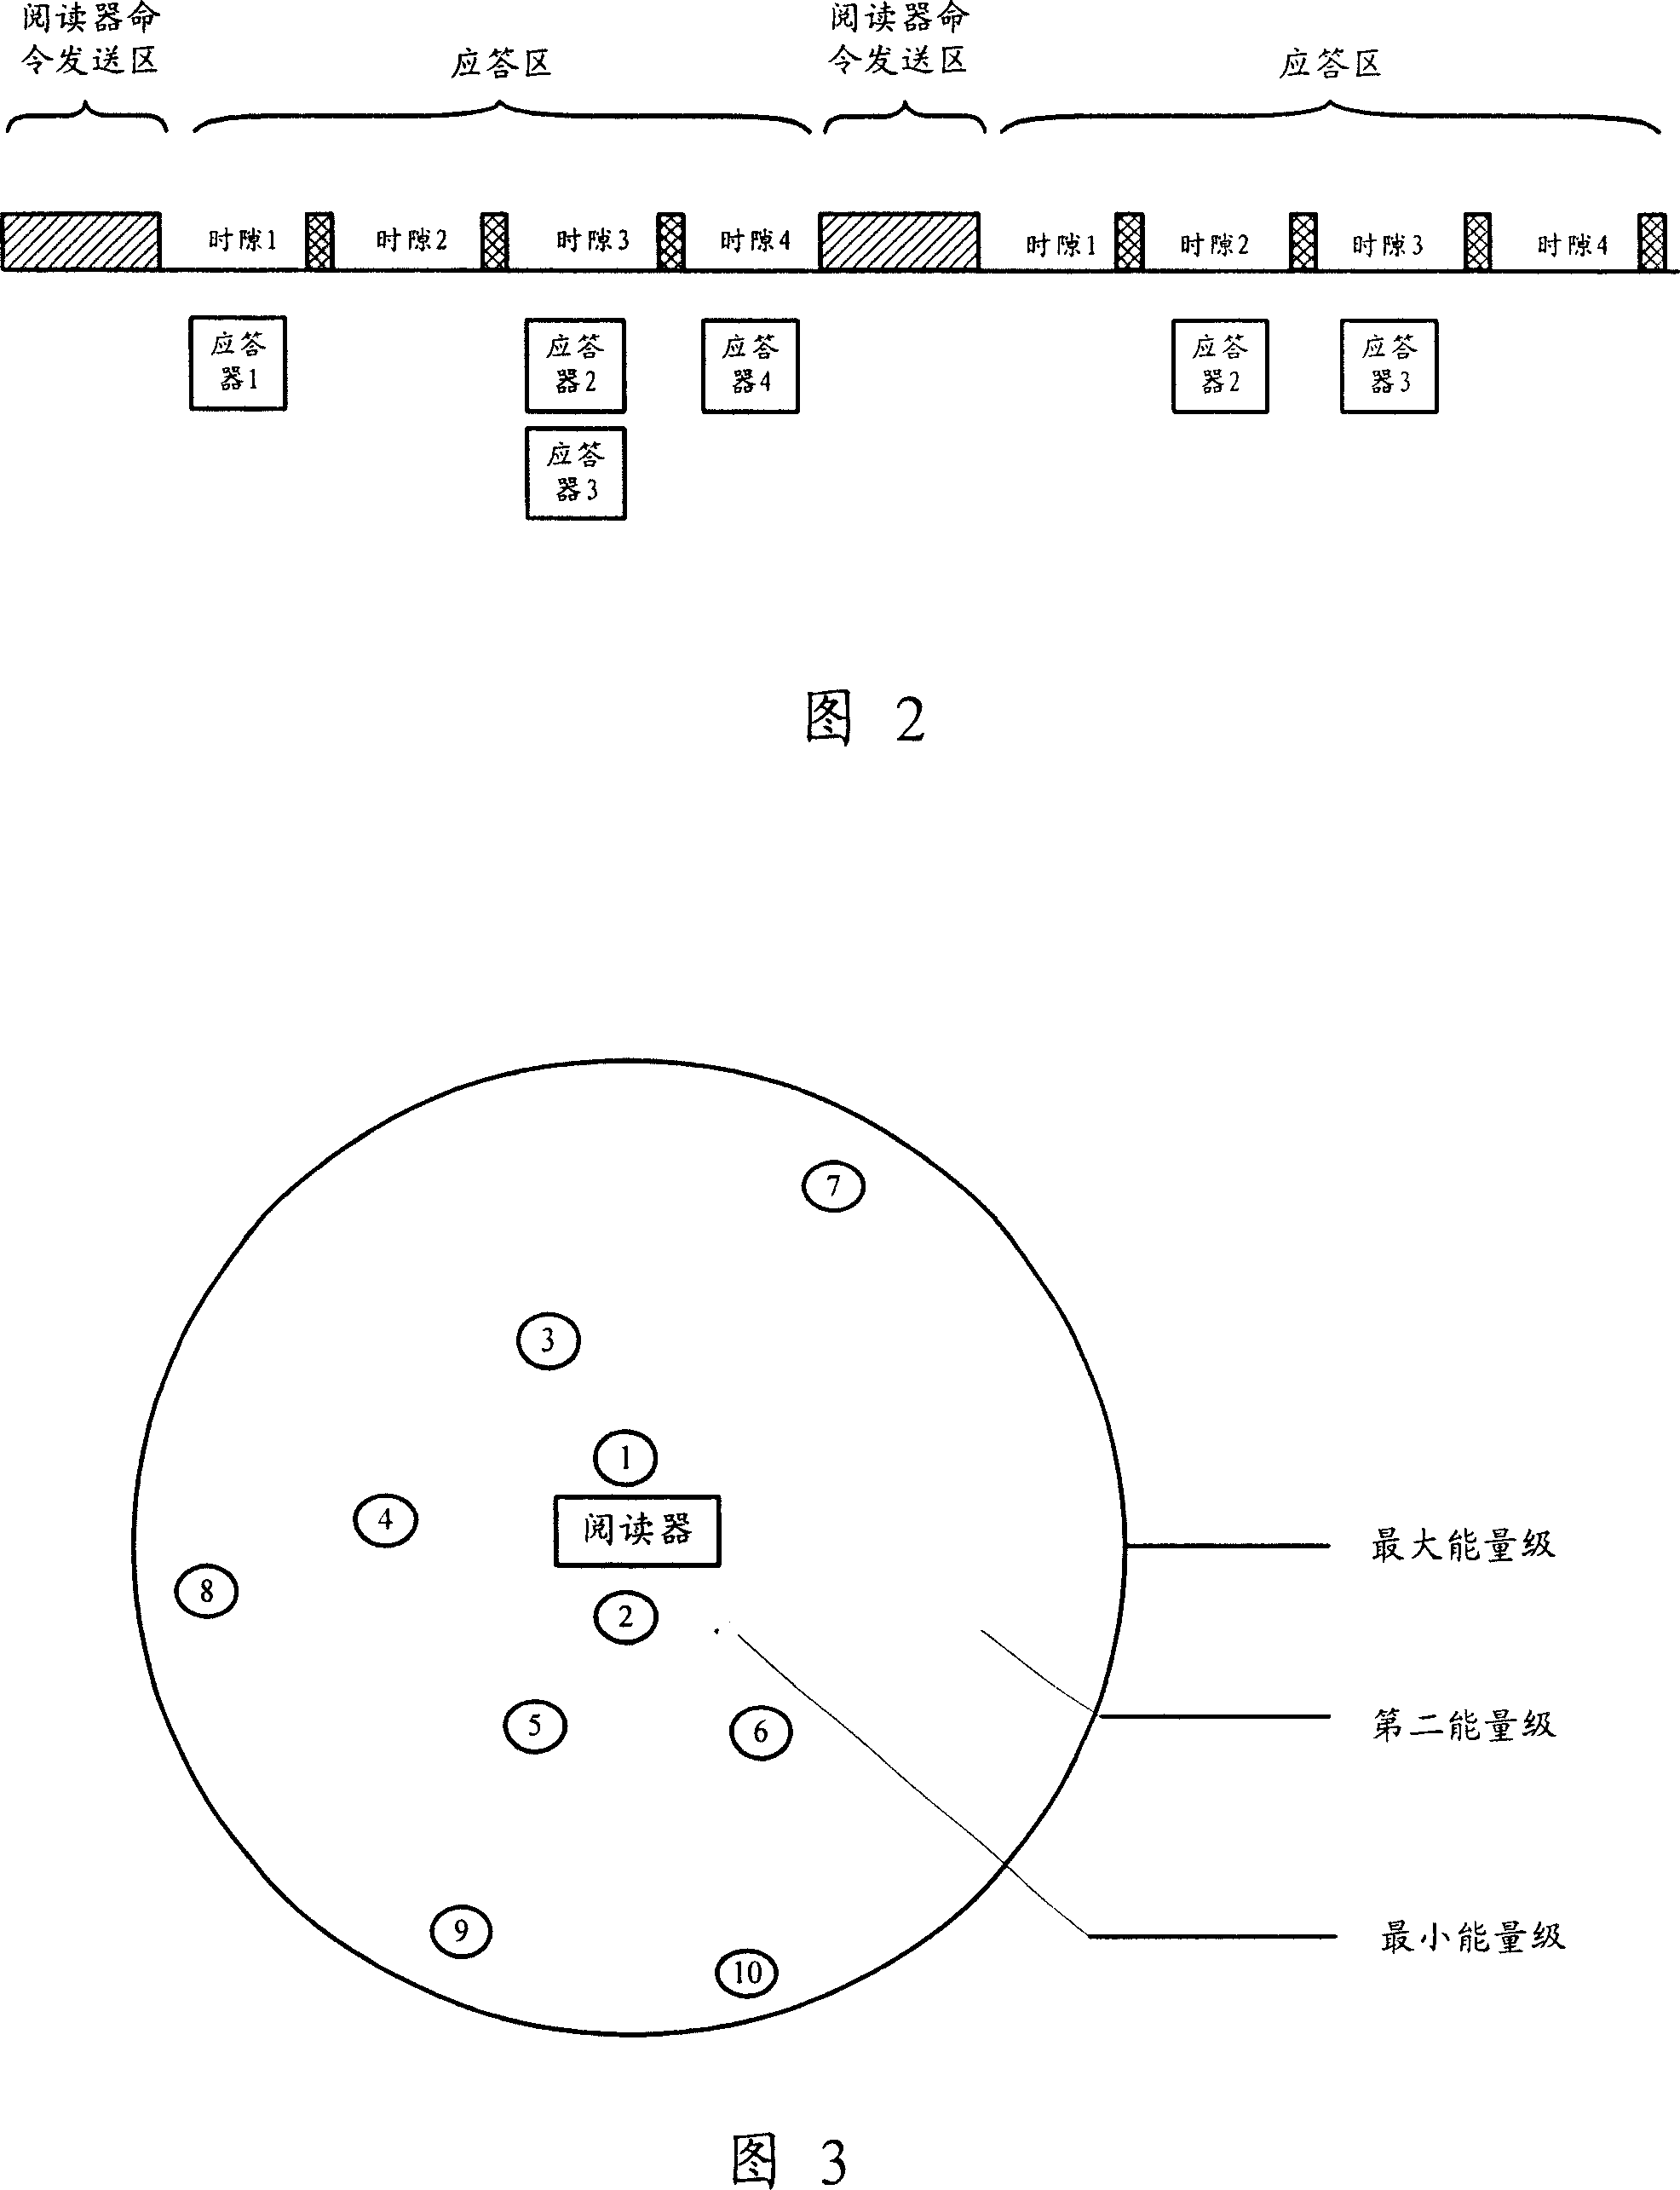 Radio-frequency identifying method and apparatus